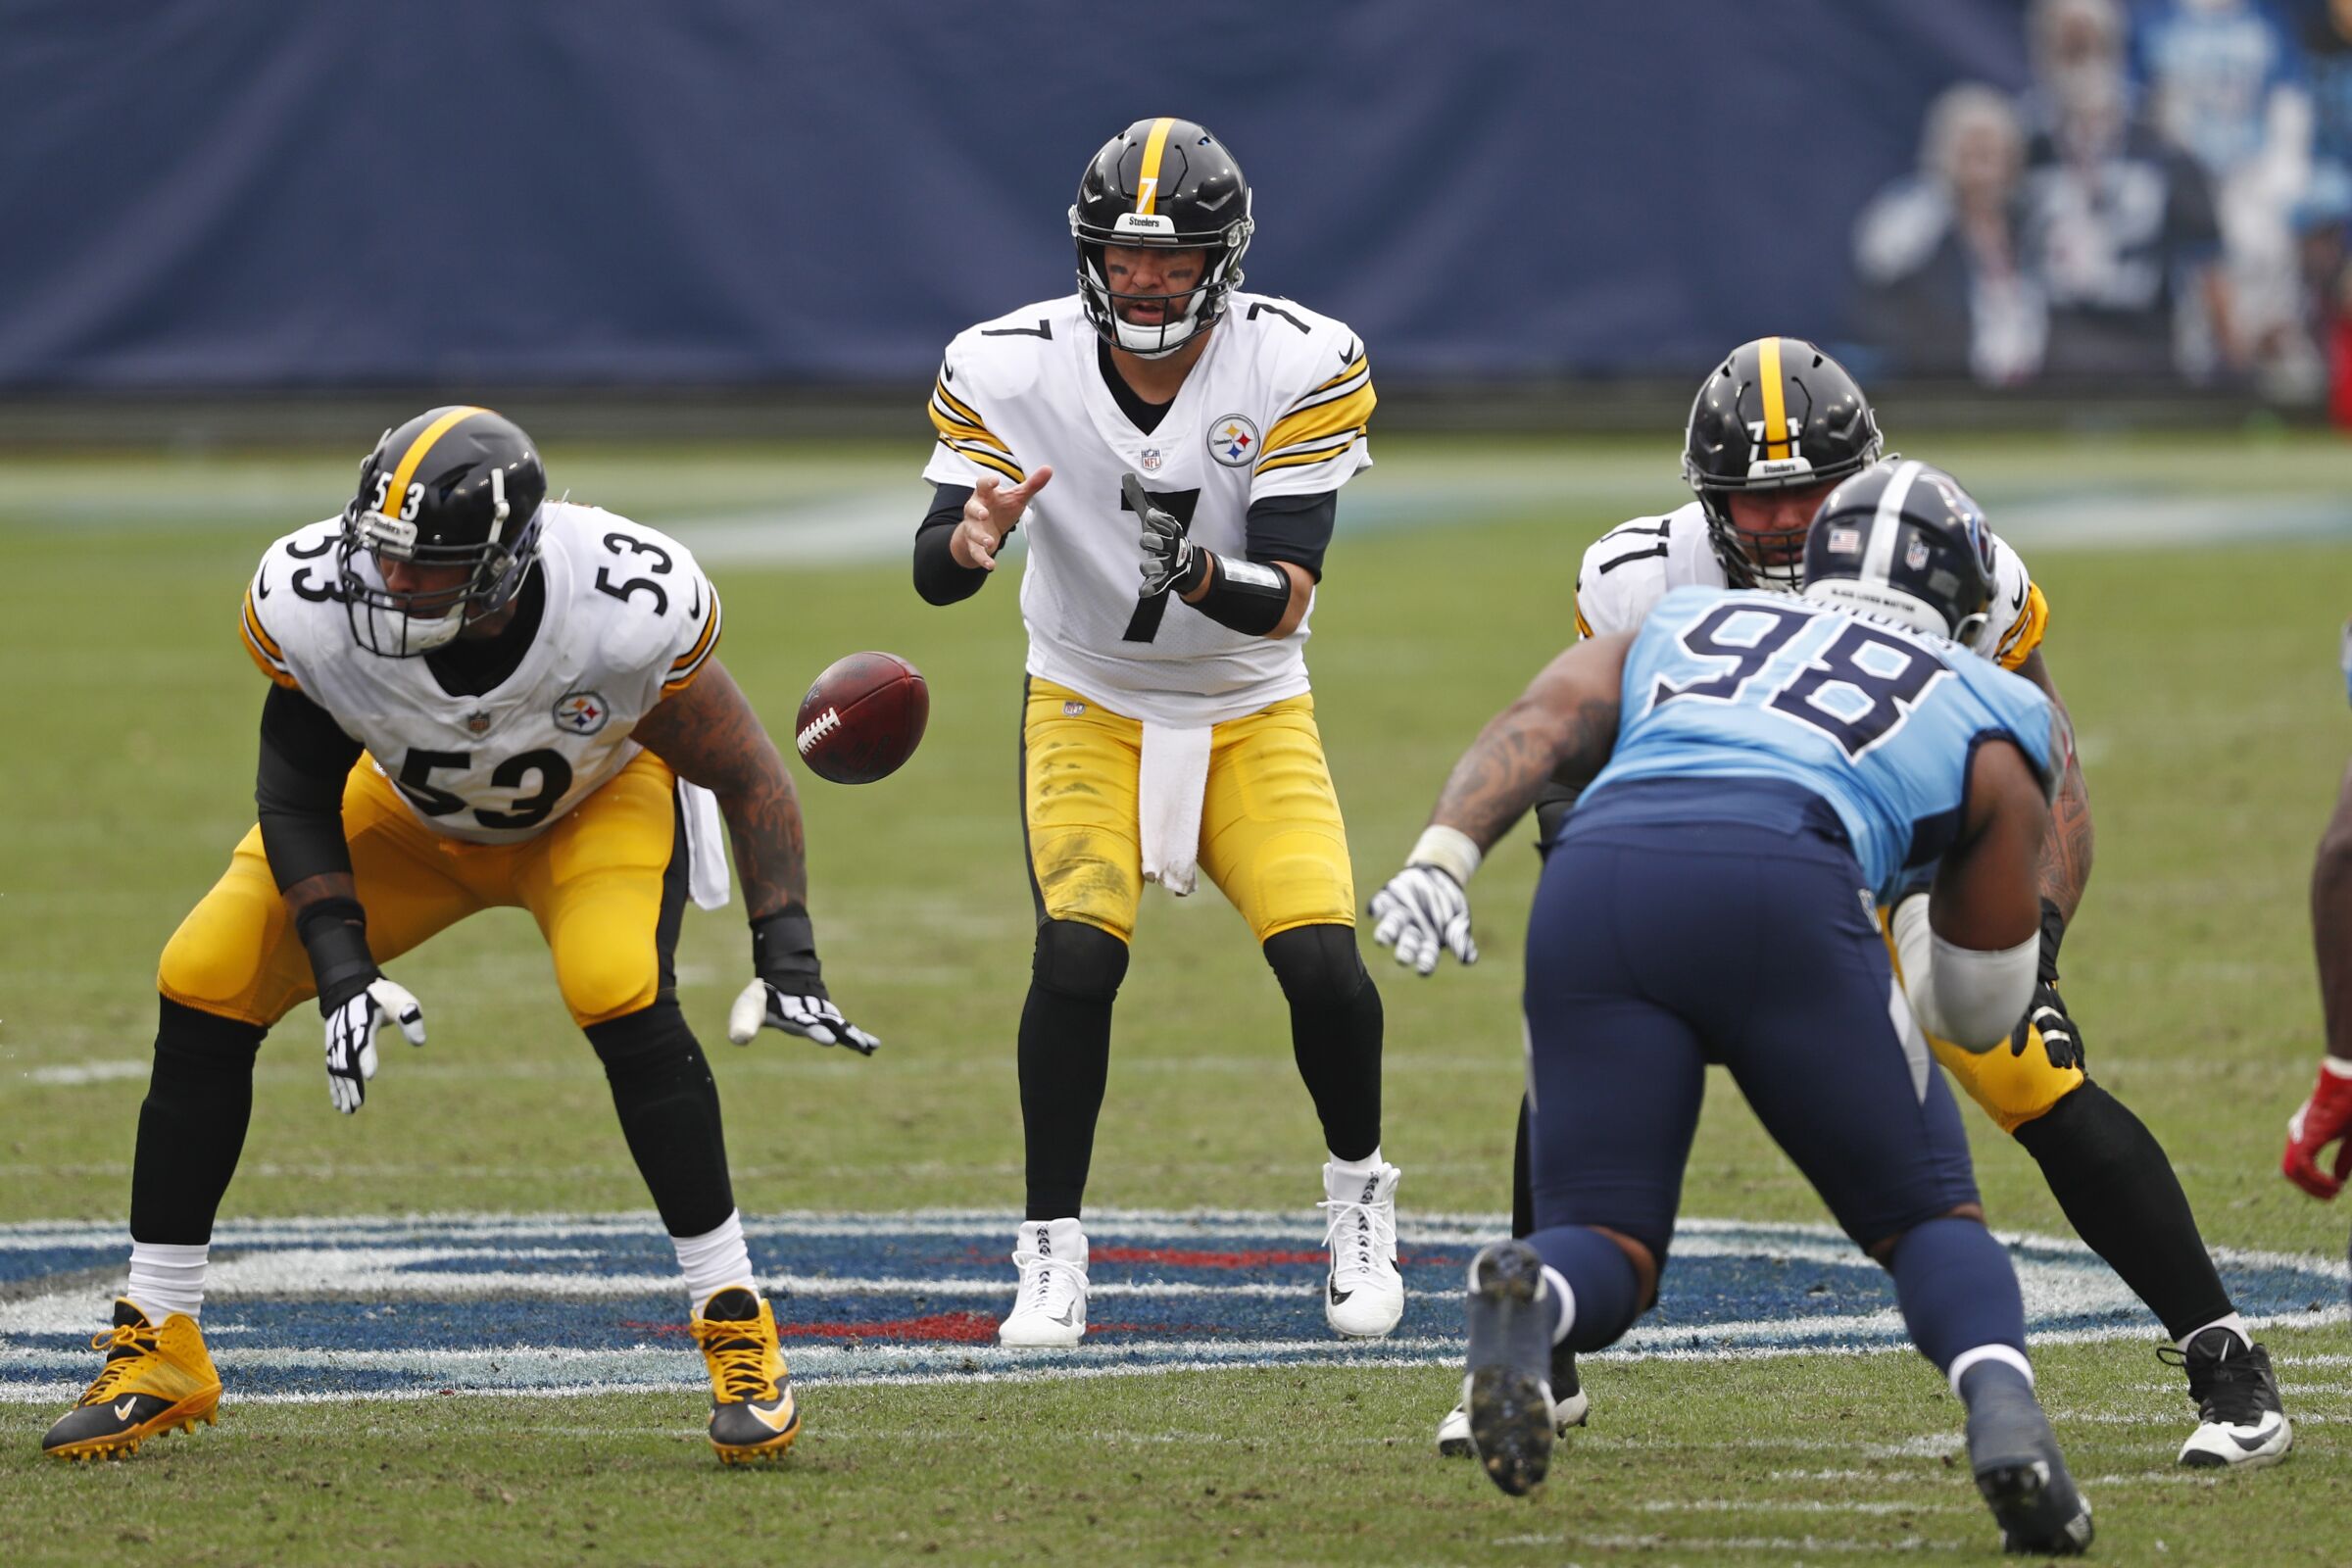 Pittsburgh Steelers quarterback Ben Roethlisberger (7) takes a snap against the Tennessee Titans.